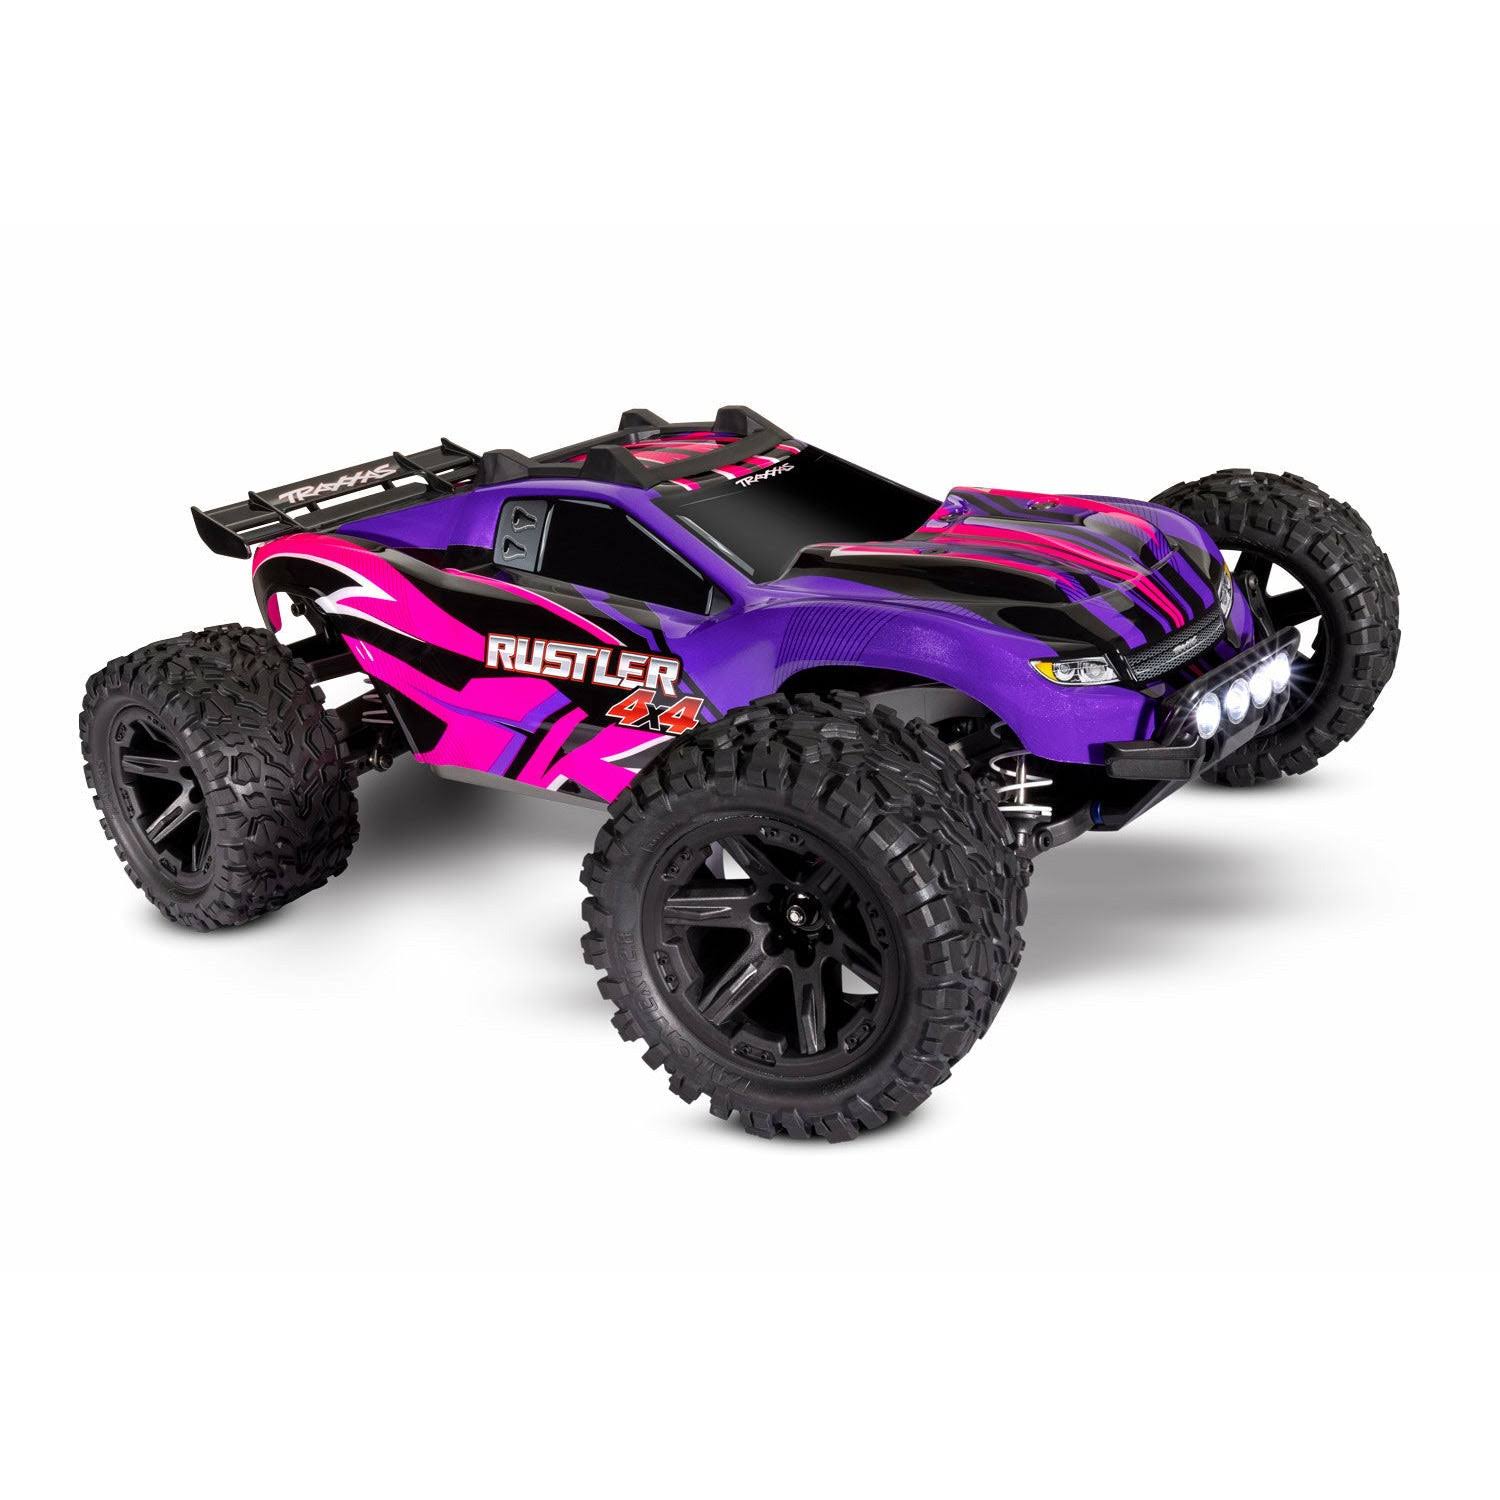 1/10 Traxxas Rustler 4X4 4WD Brushed Stadium Truck RTR - Pink with LED